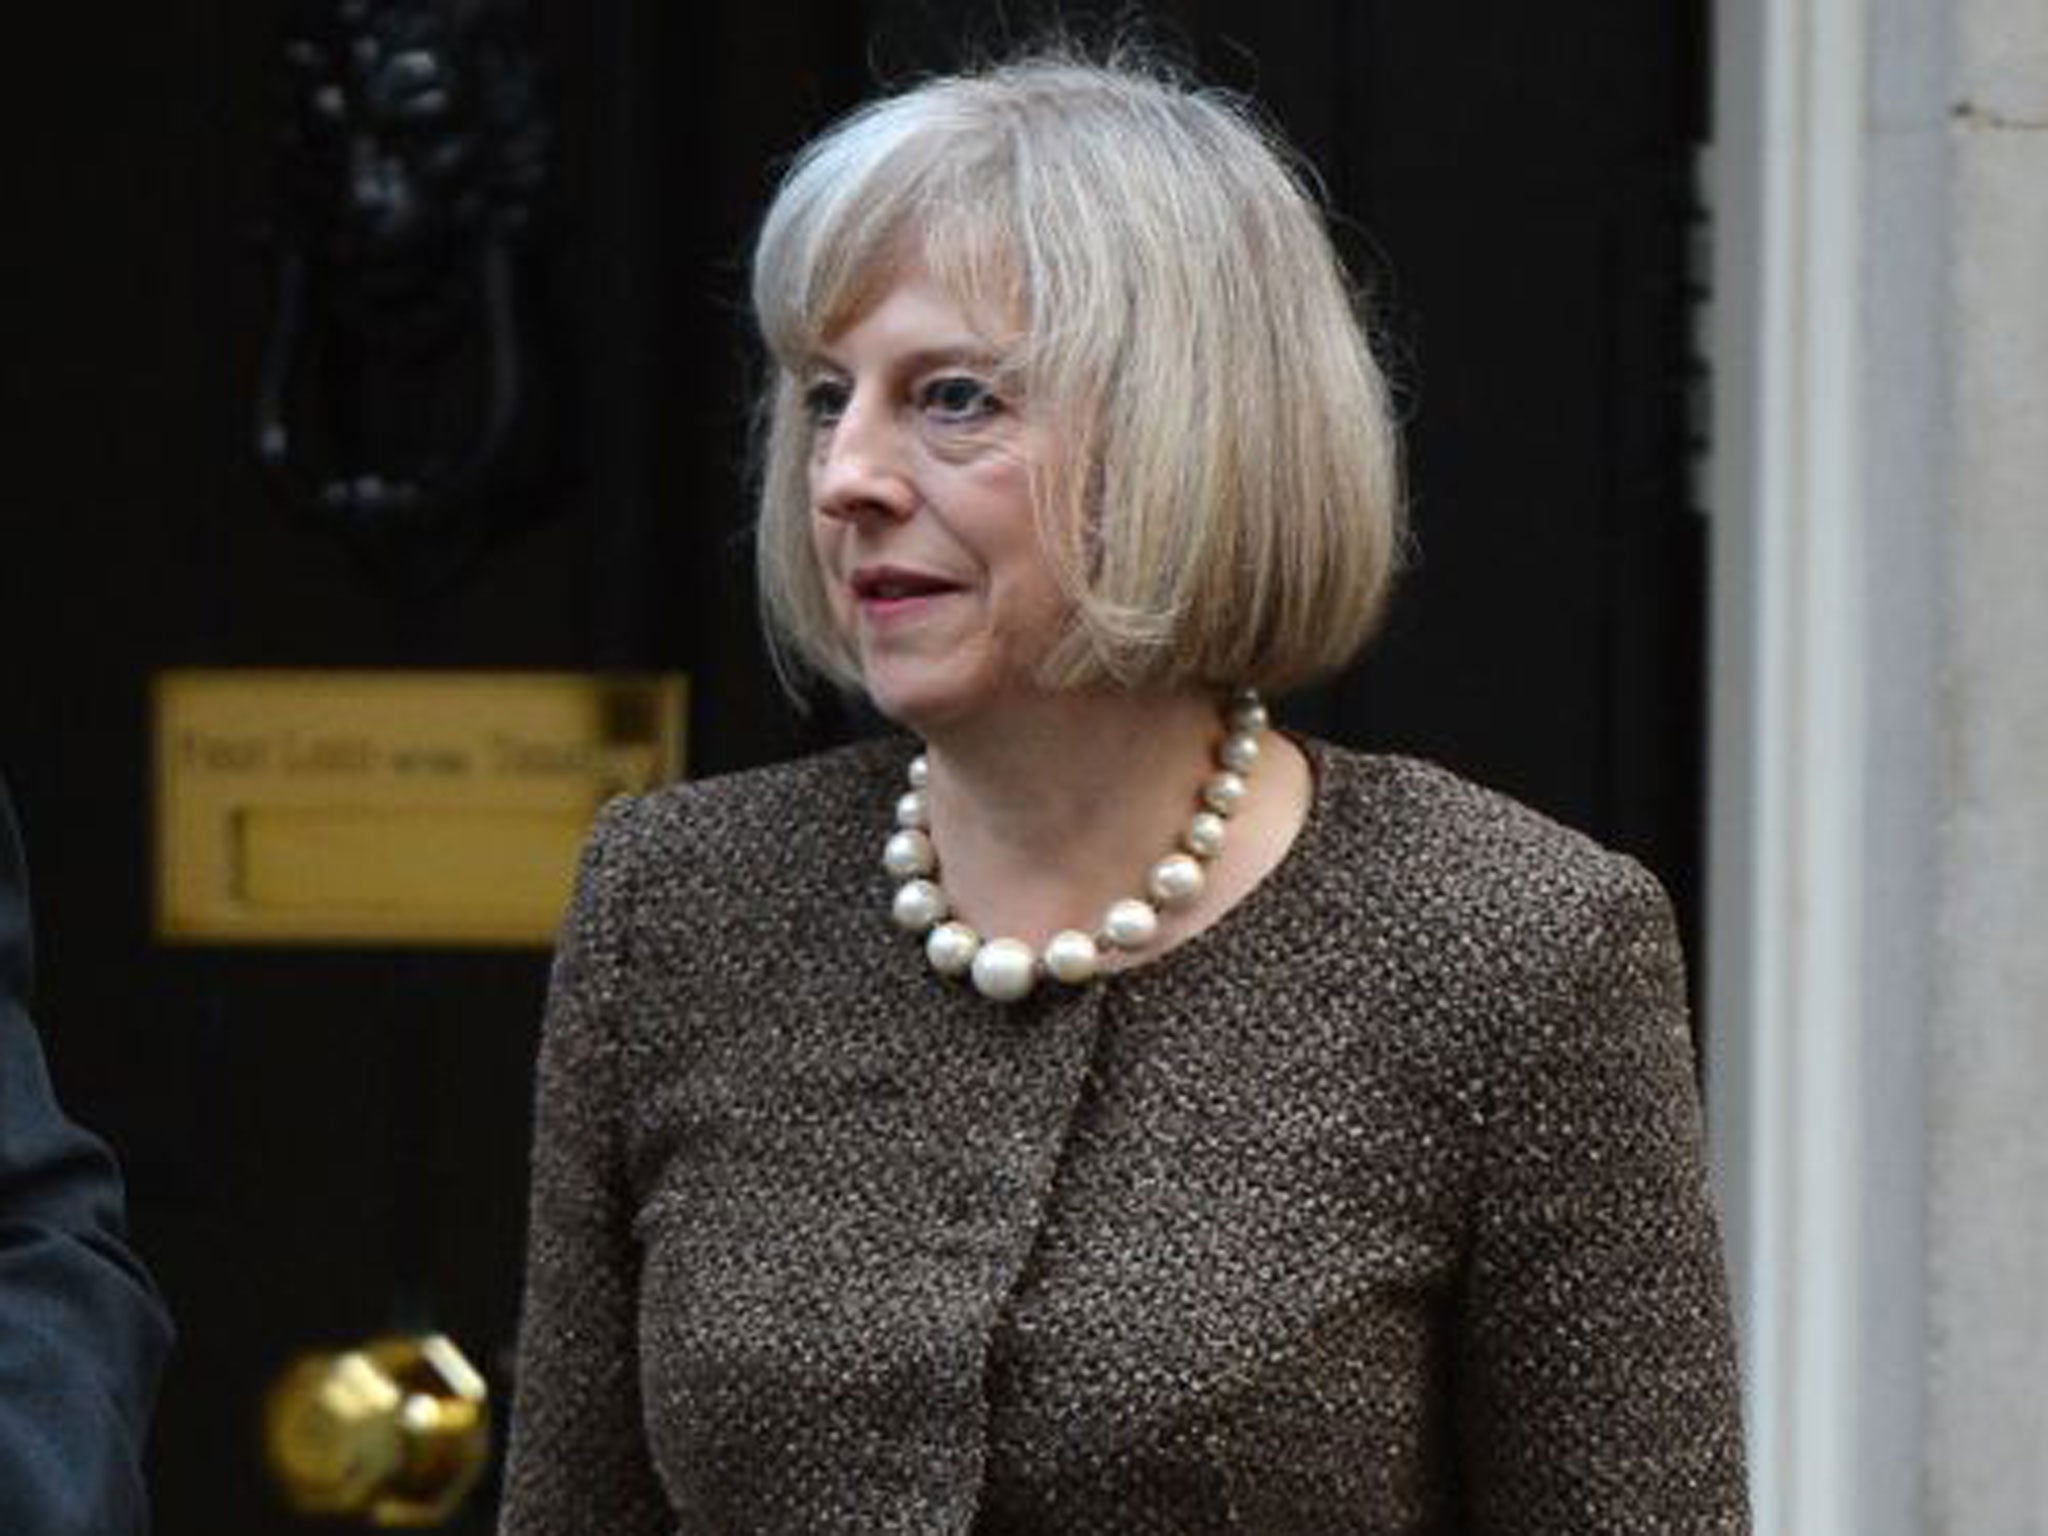 Criminal suspects who have been arrested should not normally be named until they are charged, the Theresa May says